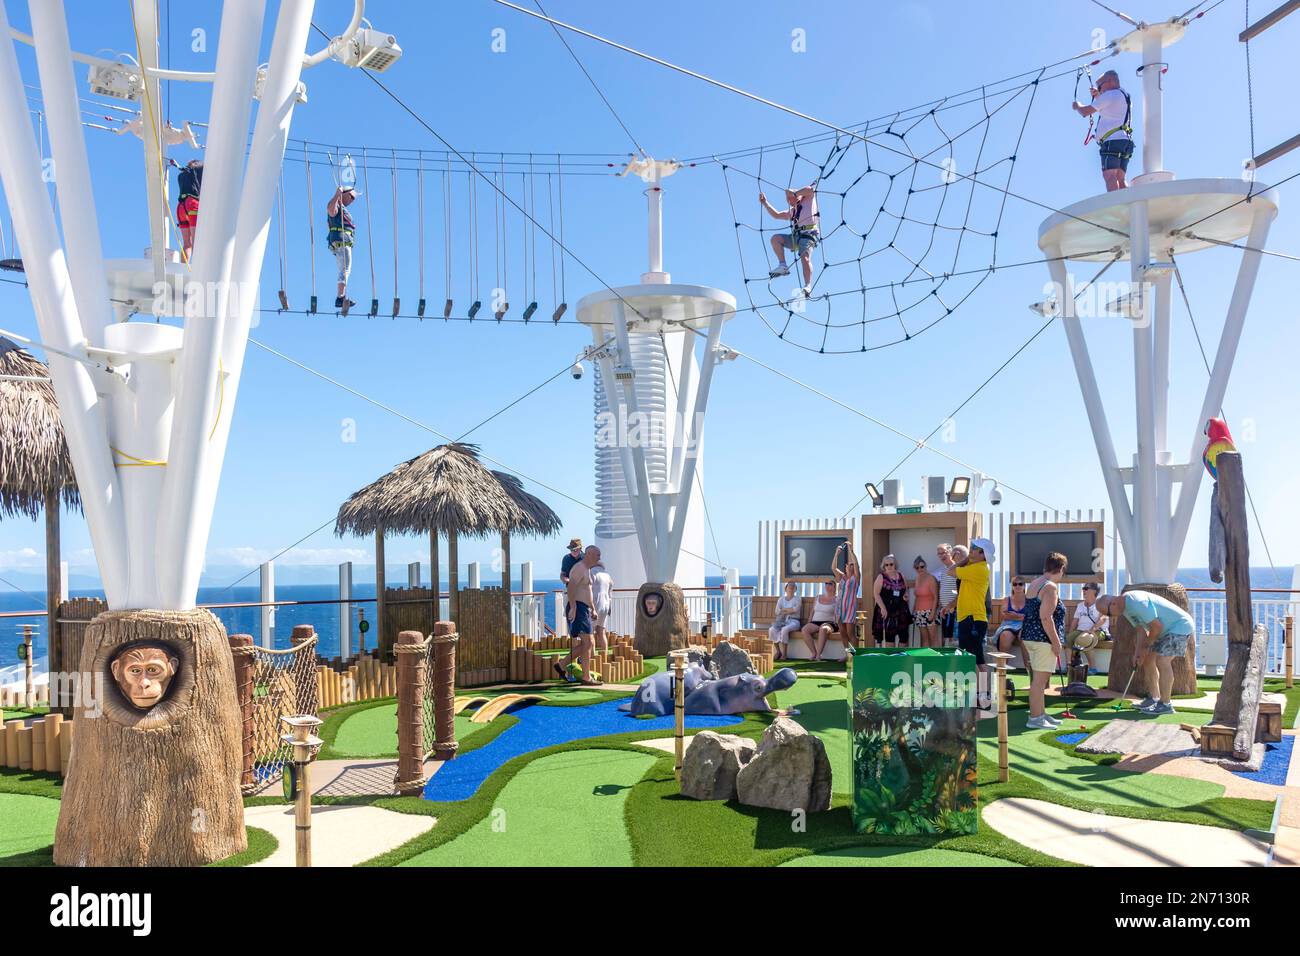 Altitude Skywalk and Mini Golf Course at stern of P&O Arvia cruise ship, Lesser Antilles, Caribbean Stock Photo